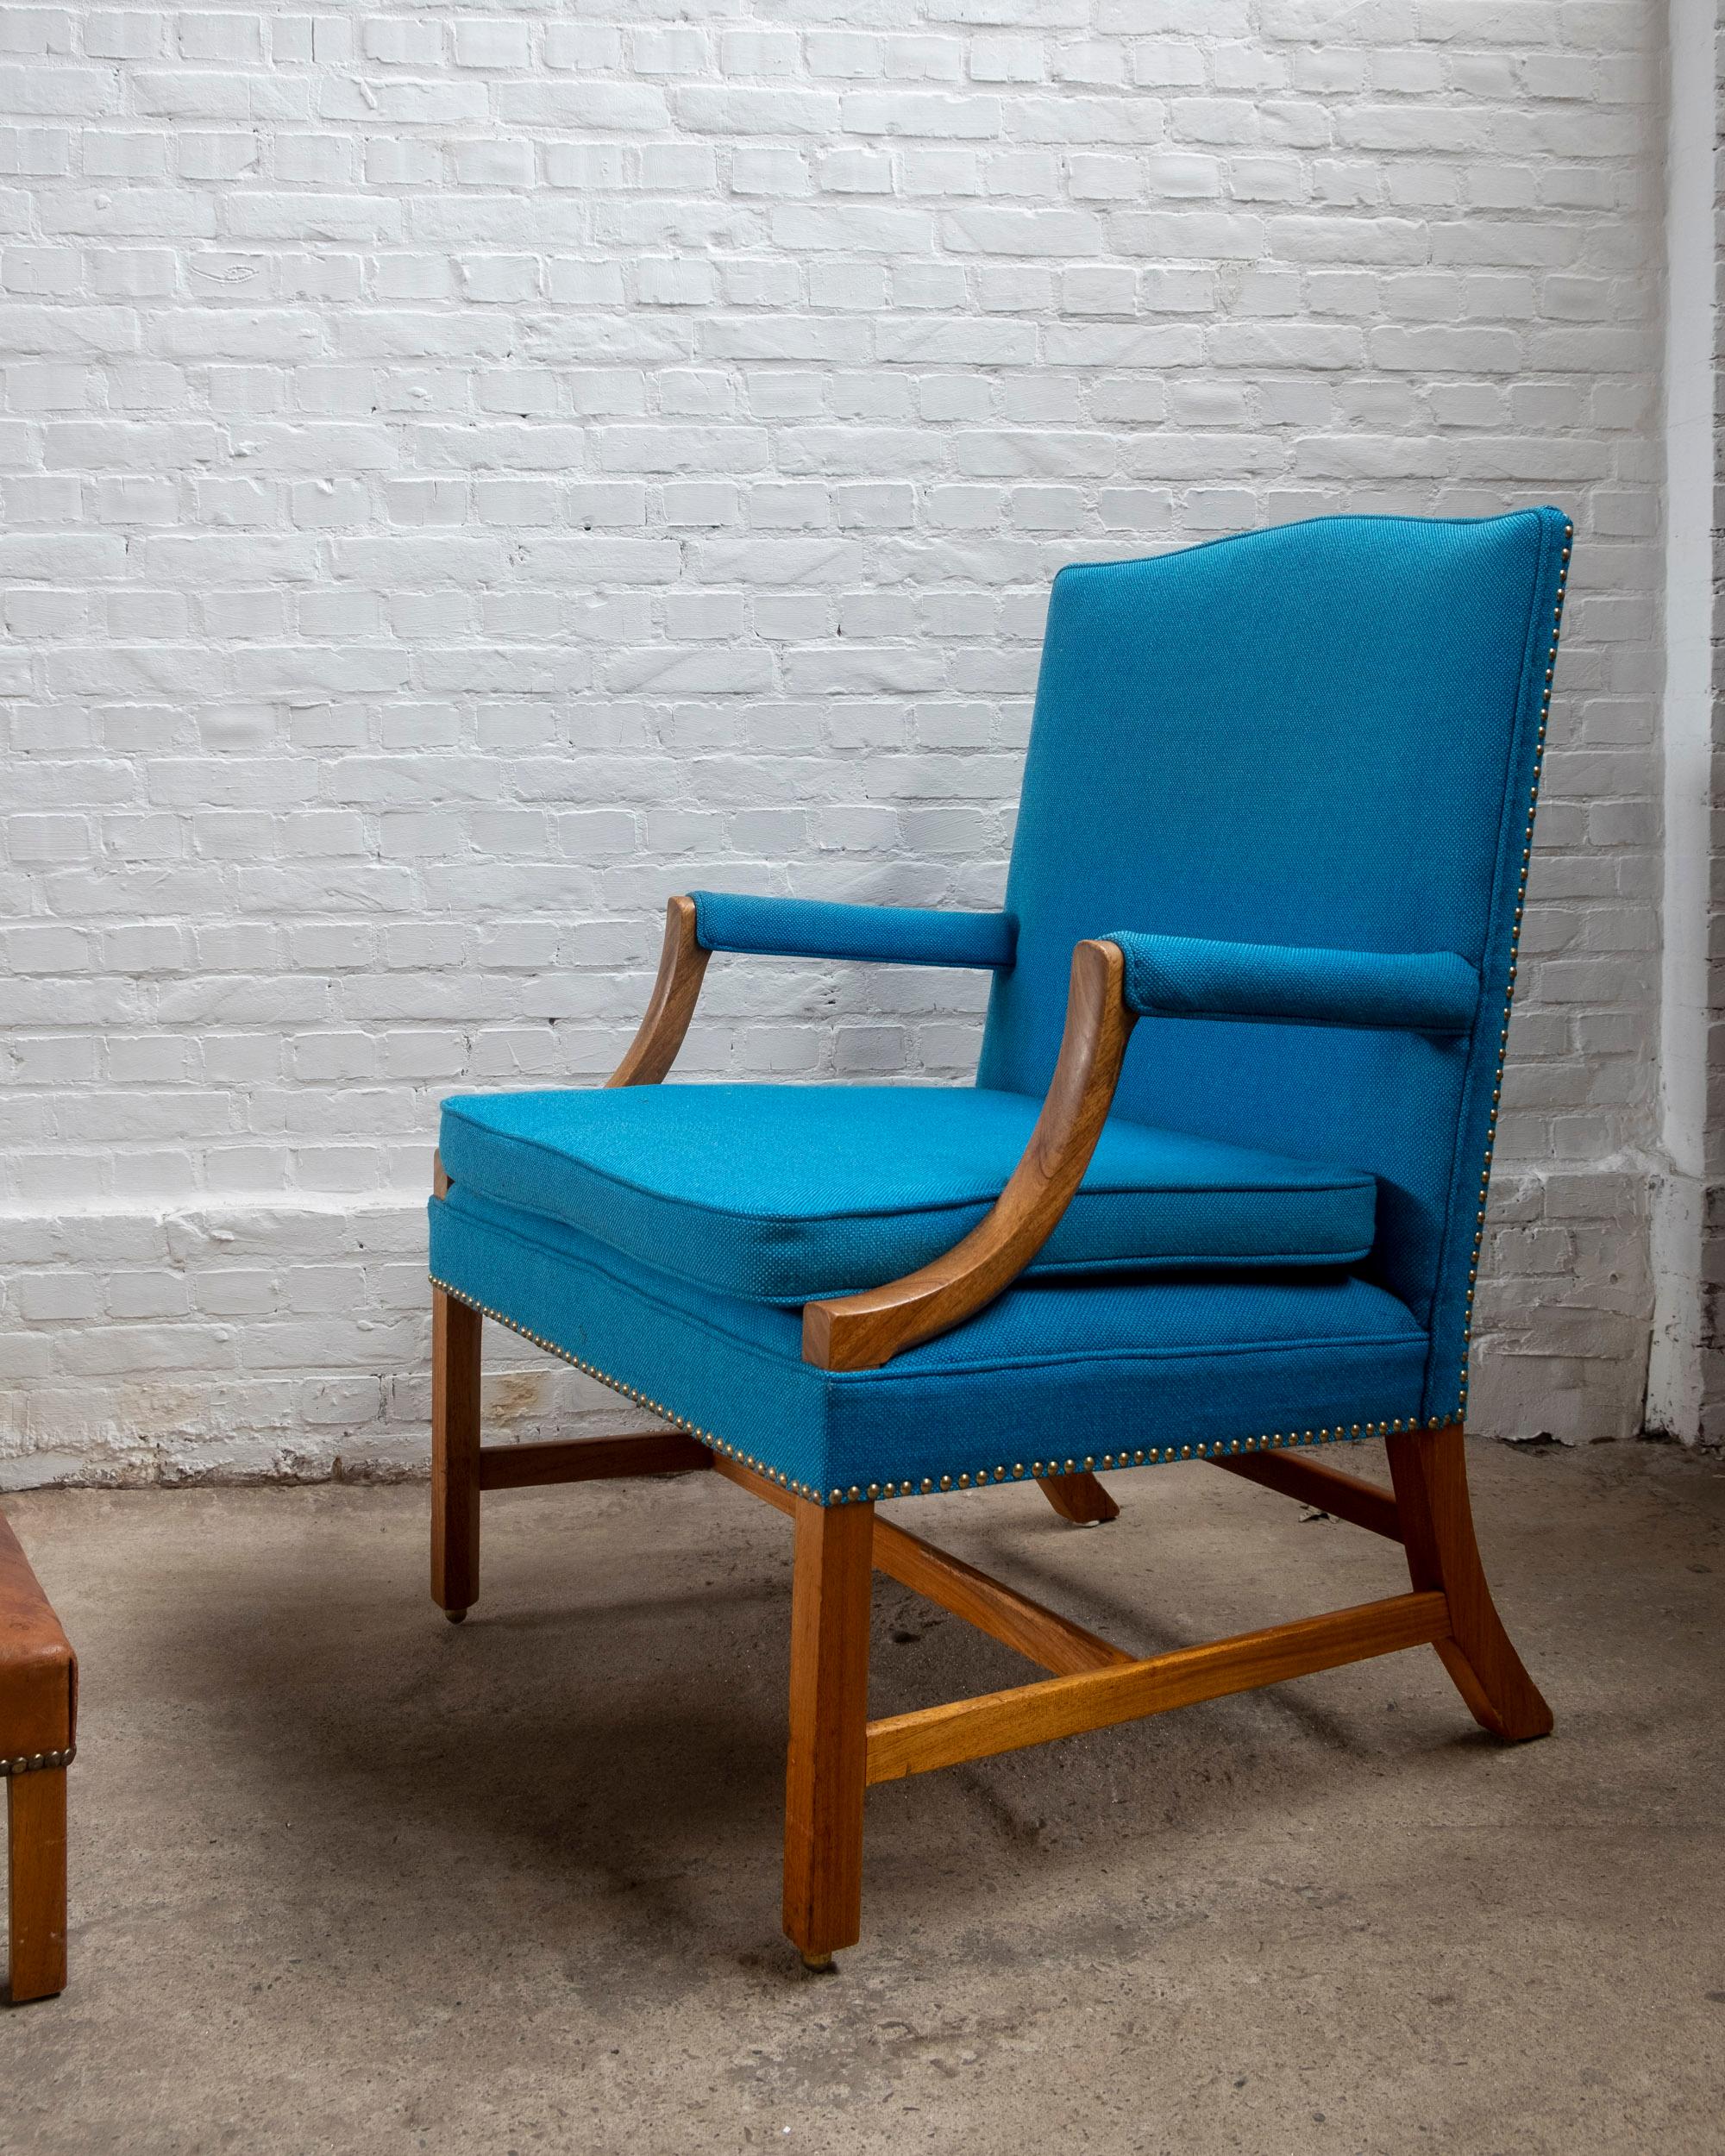 Scandinavian Modern Ole Wanscher Attributed to: Lounge Chair and Ottoman, 1940s, Denmark For Sale